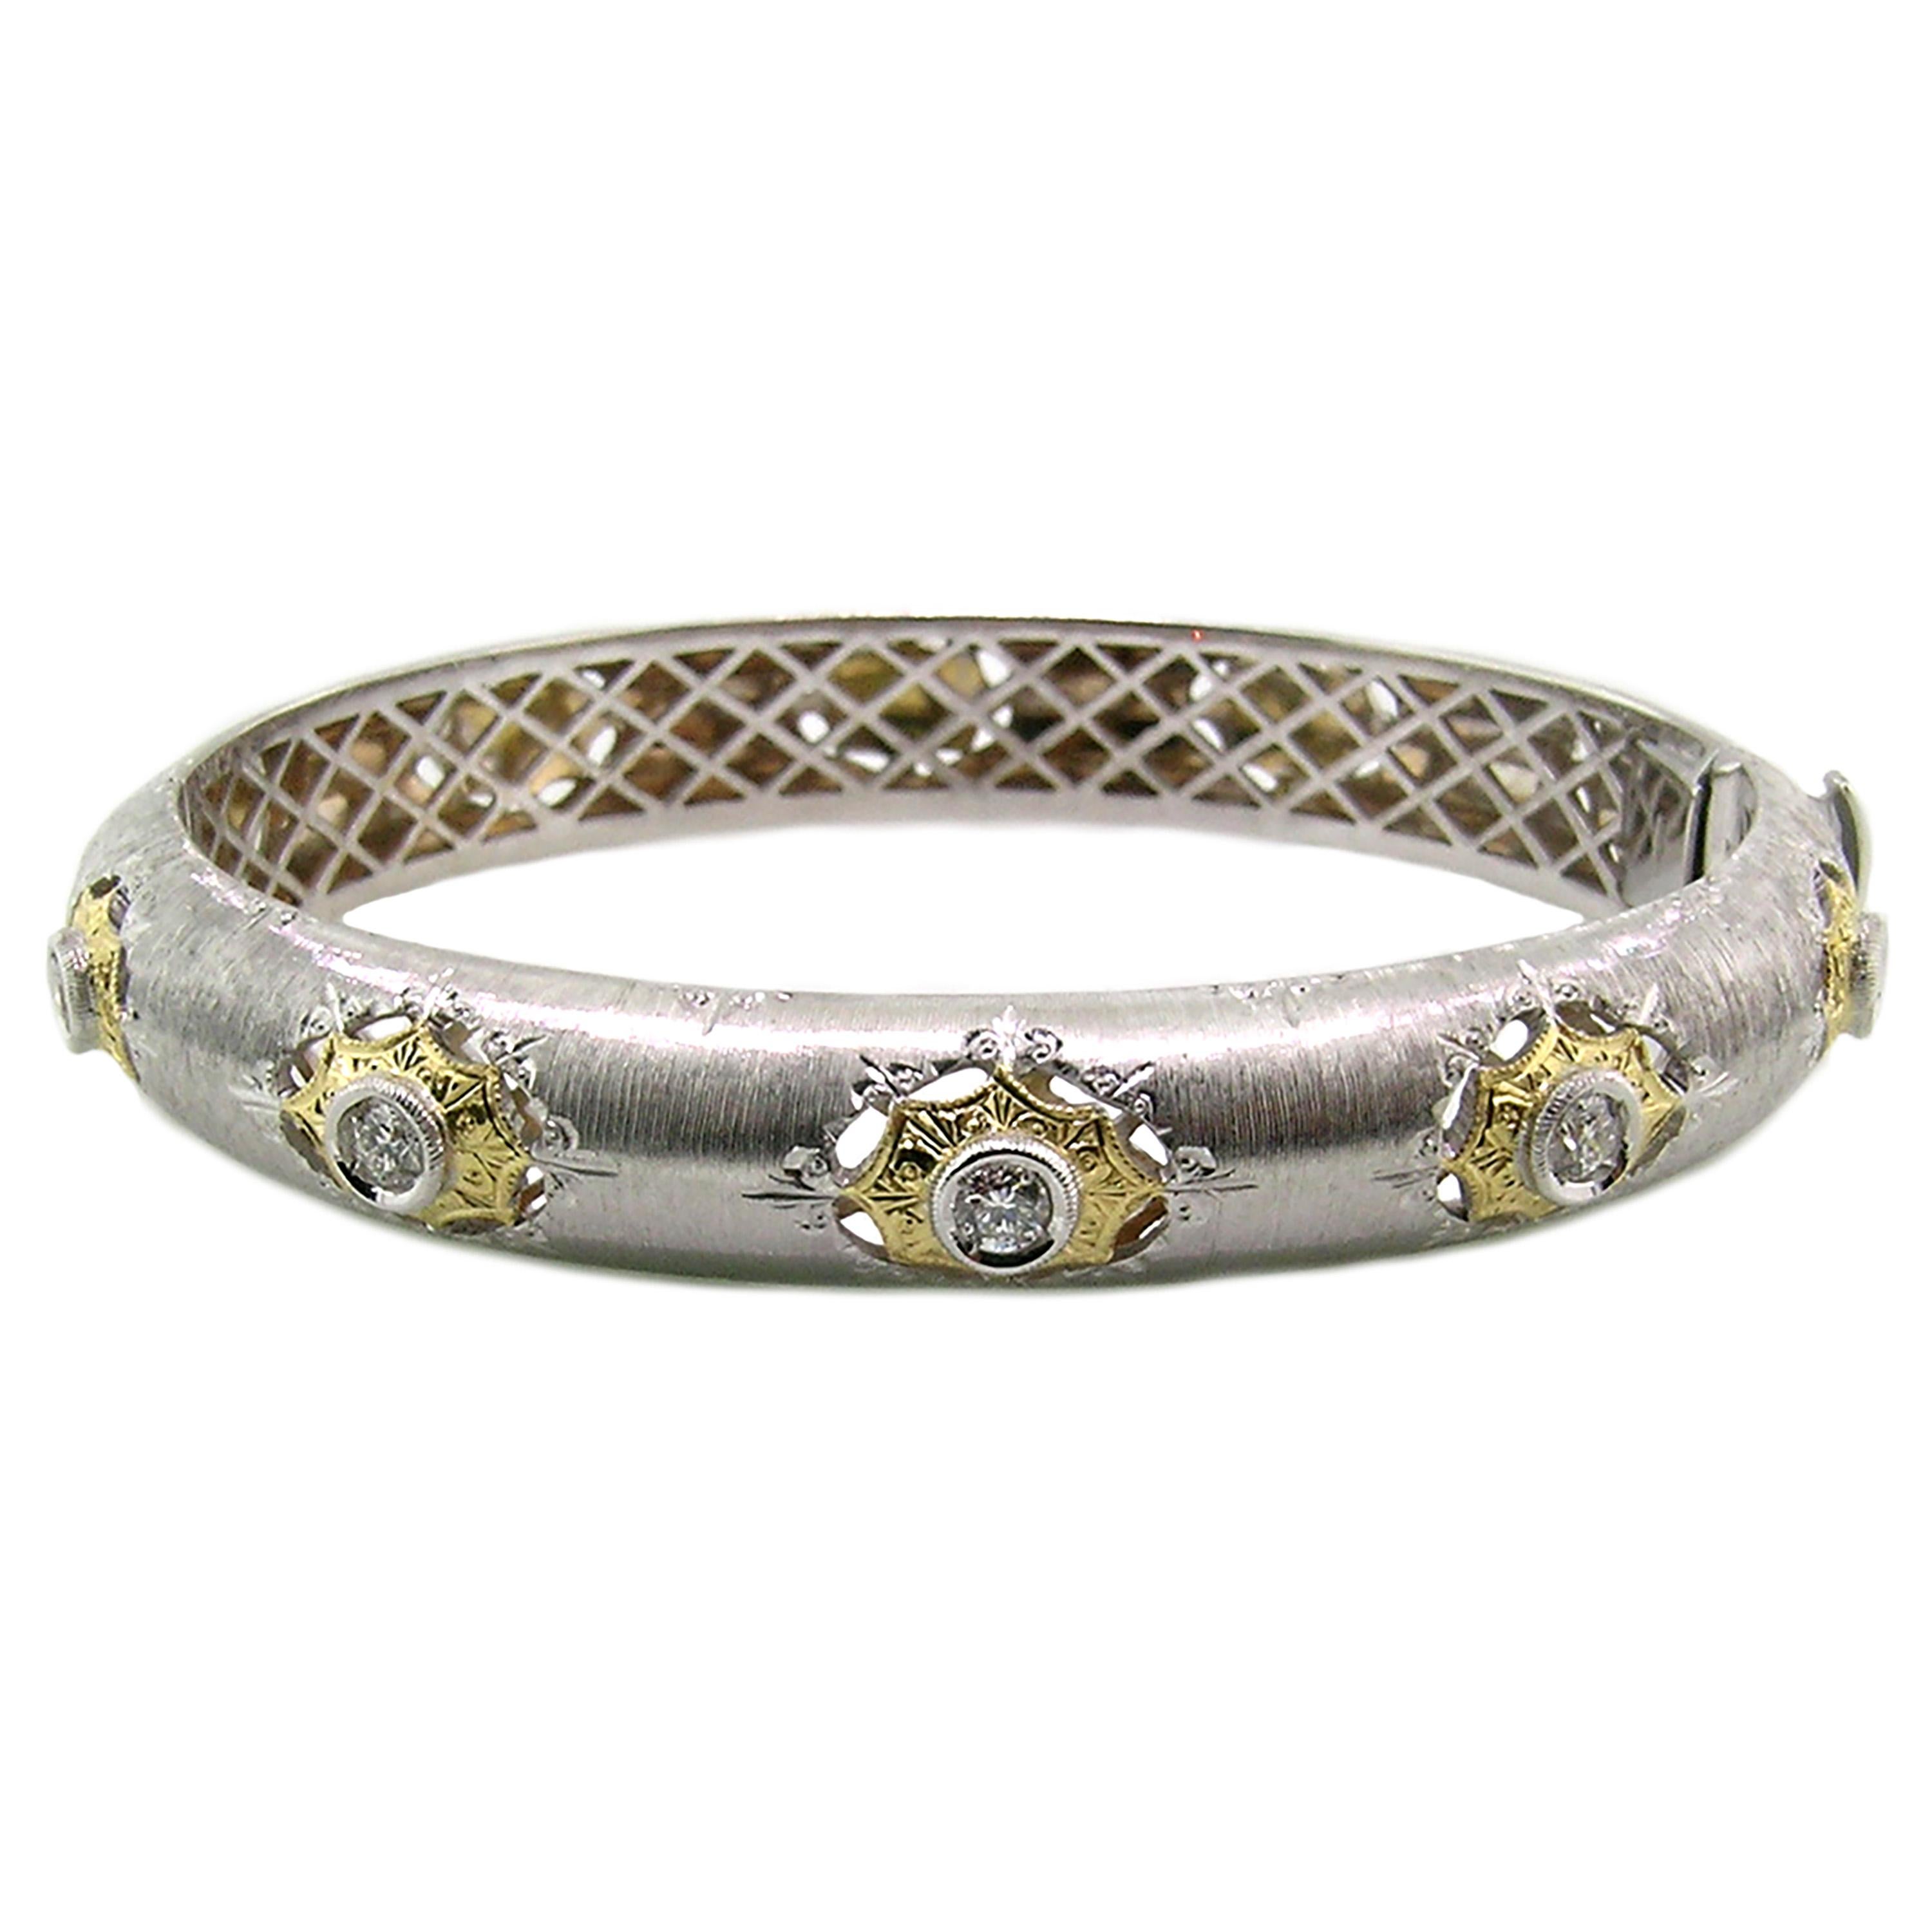 The execution and quality of the Olympia bangle are old-world, but the style is bold and modern. The two tone bangle is entirely finished in hand-engraved details which date back to the Italian Renaissance.

This bangle is oval-shaped, both for